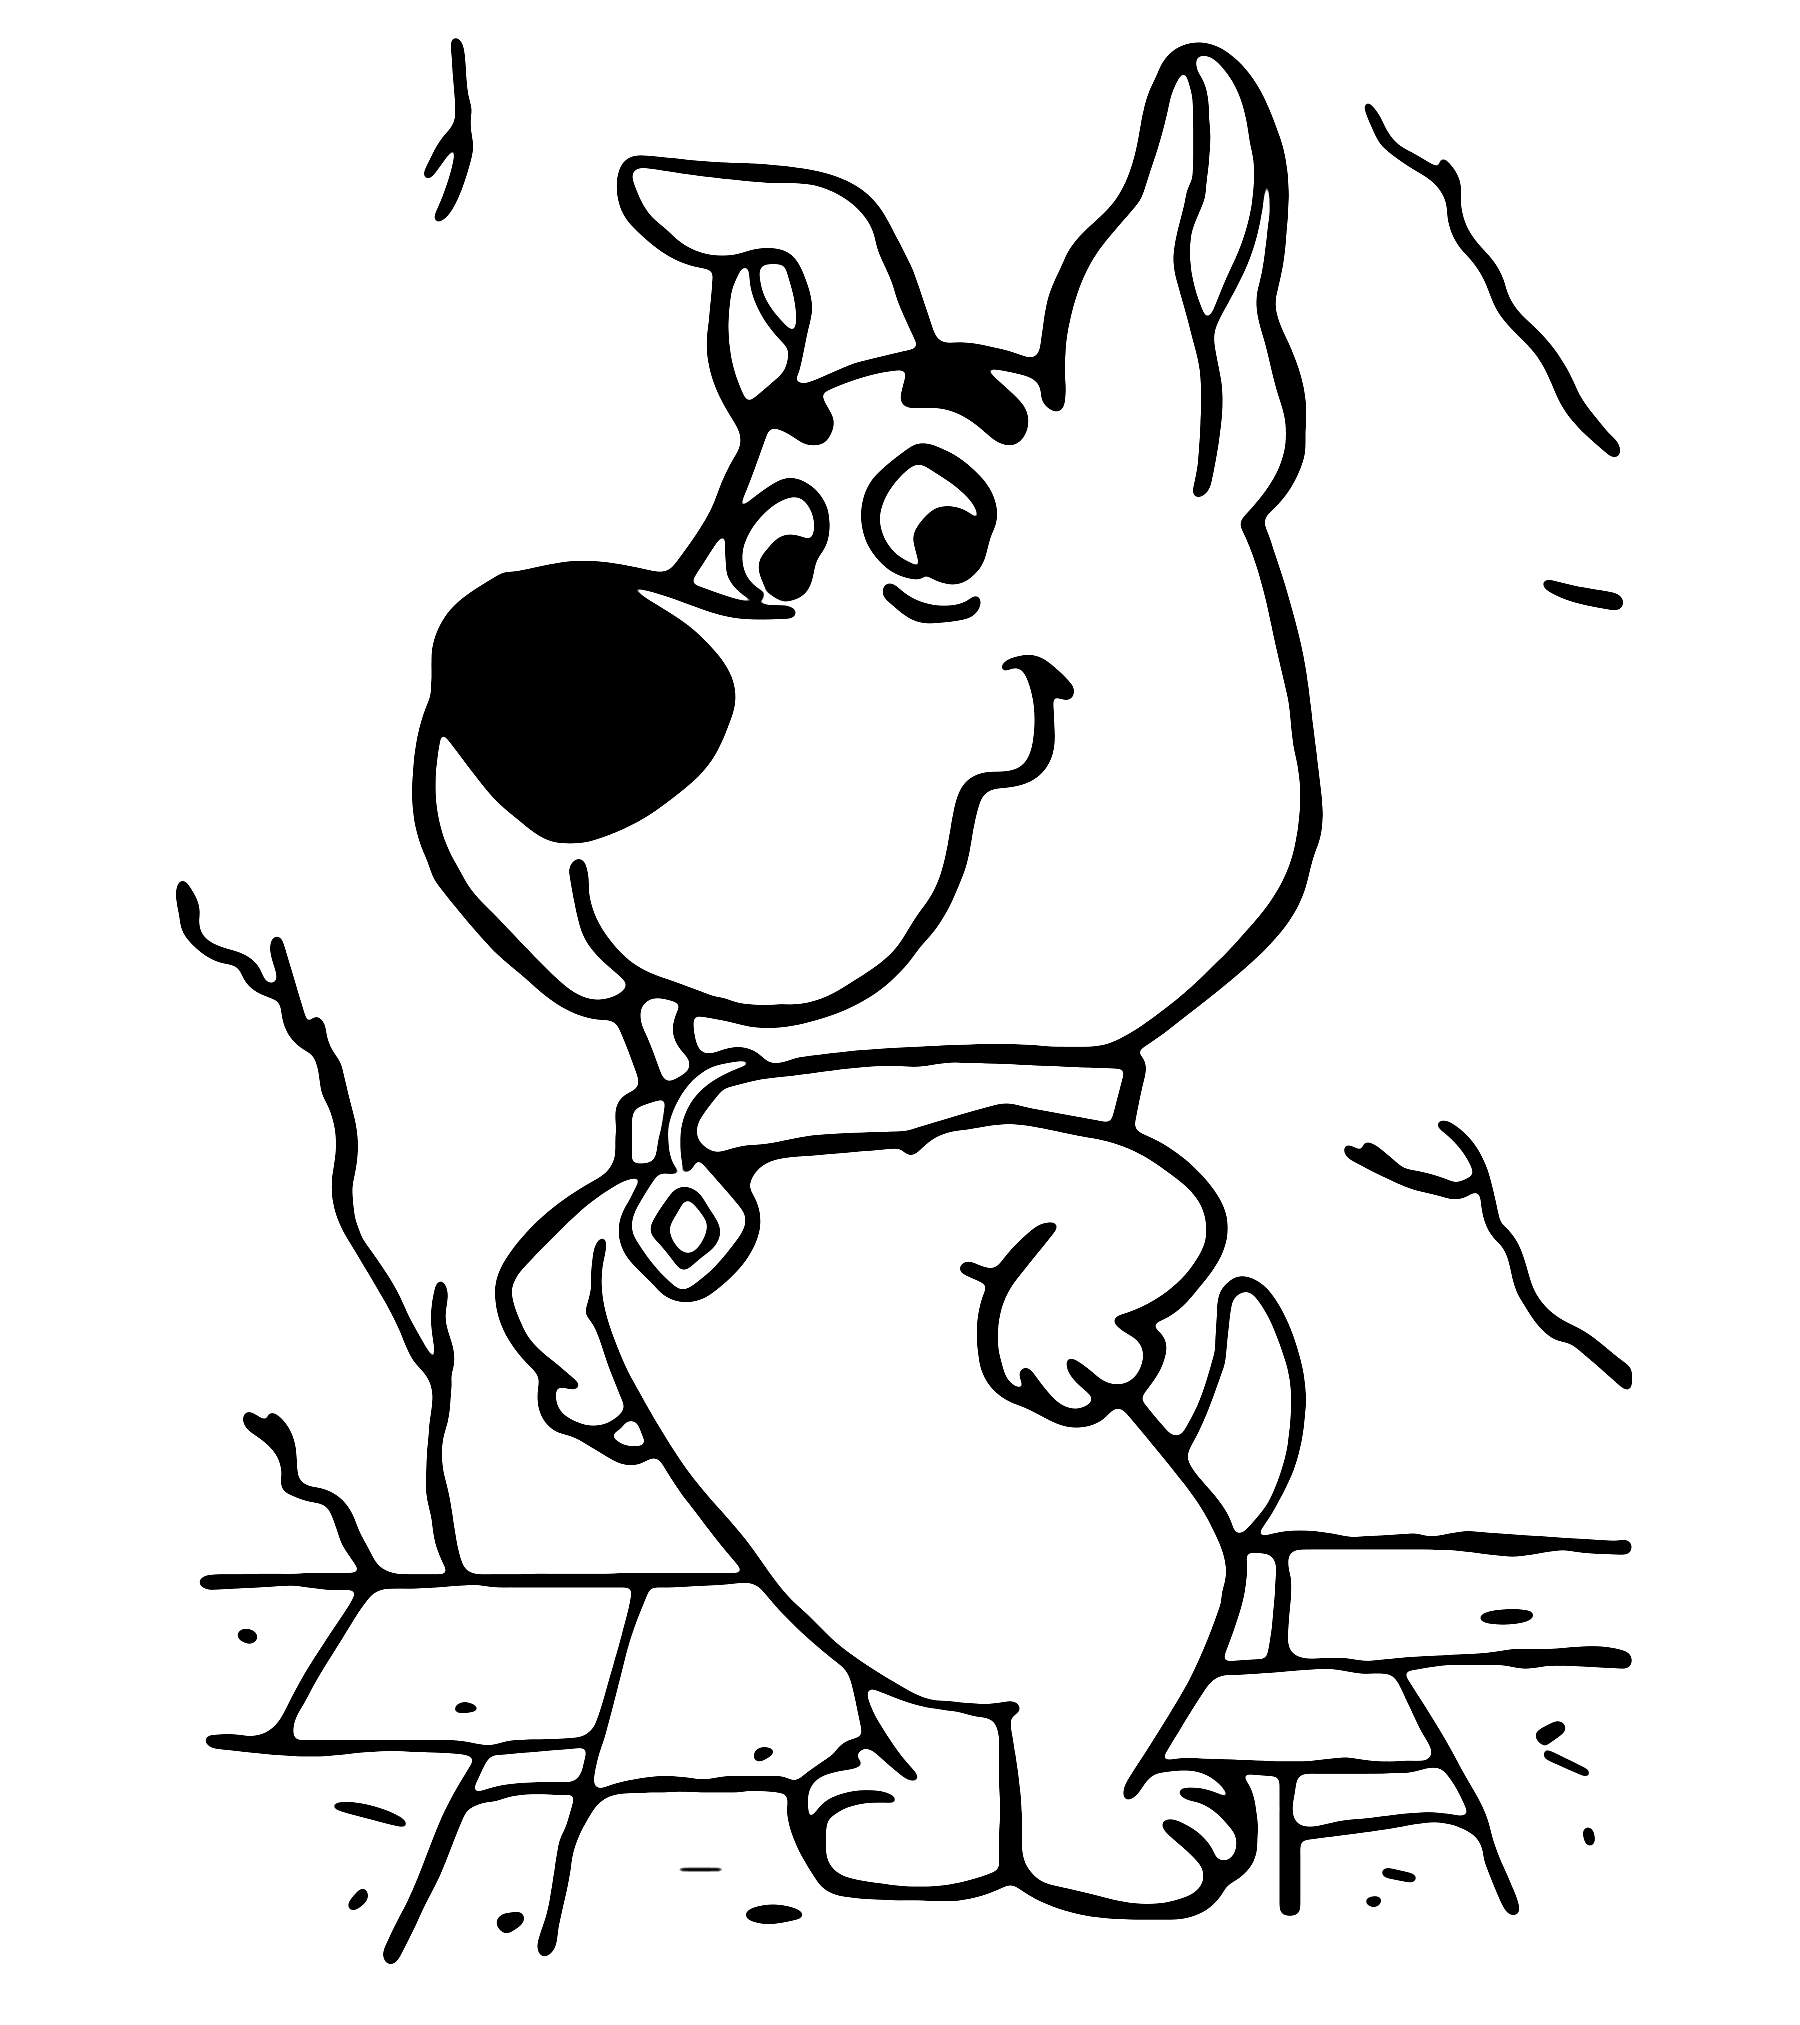 Coloring Page of Scrappy Doo Scooby Doo Nephew